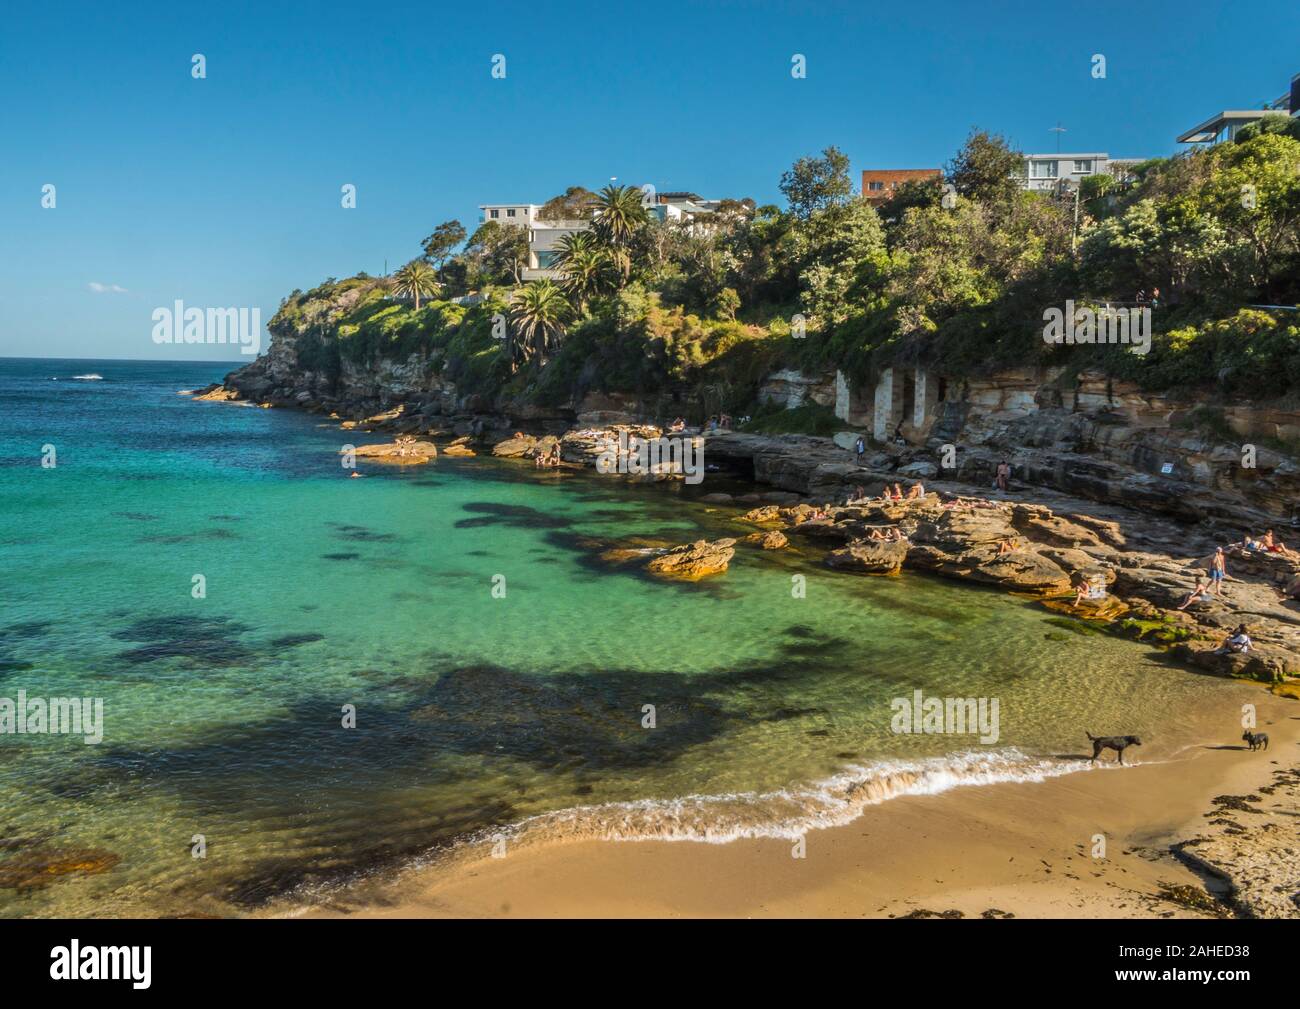 Beautiful view of one of the many beaches along the Bondi to Coogee coastal walk in Sydney Stock Photo